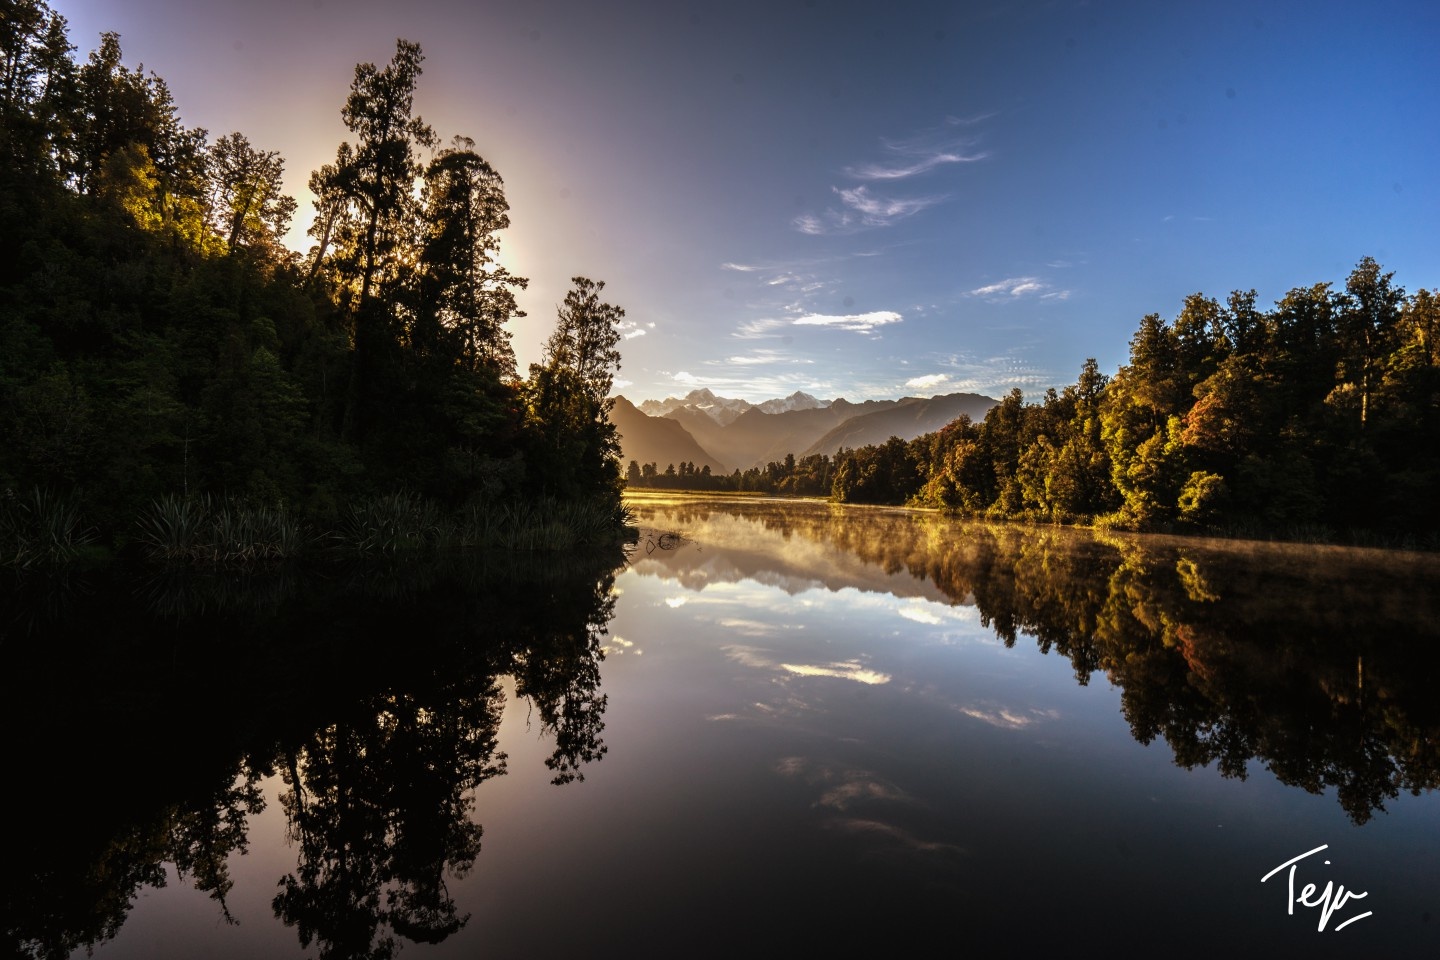 A Look at New Zealand’s Legendary Lake